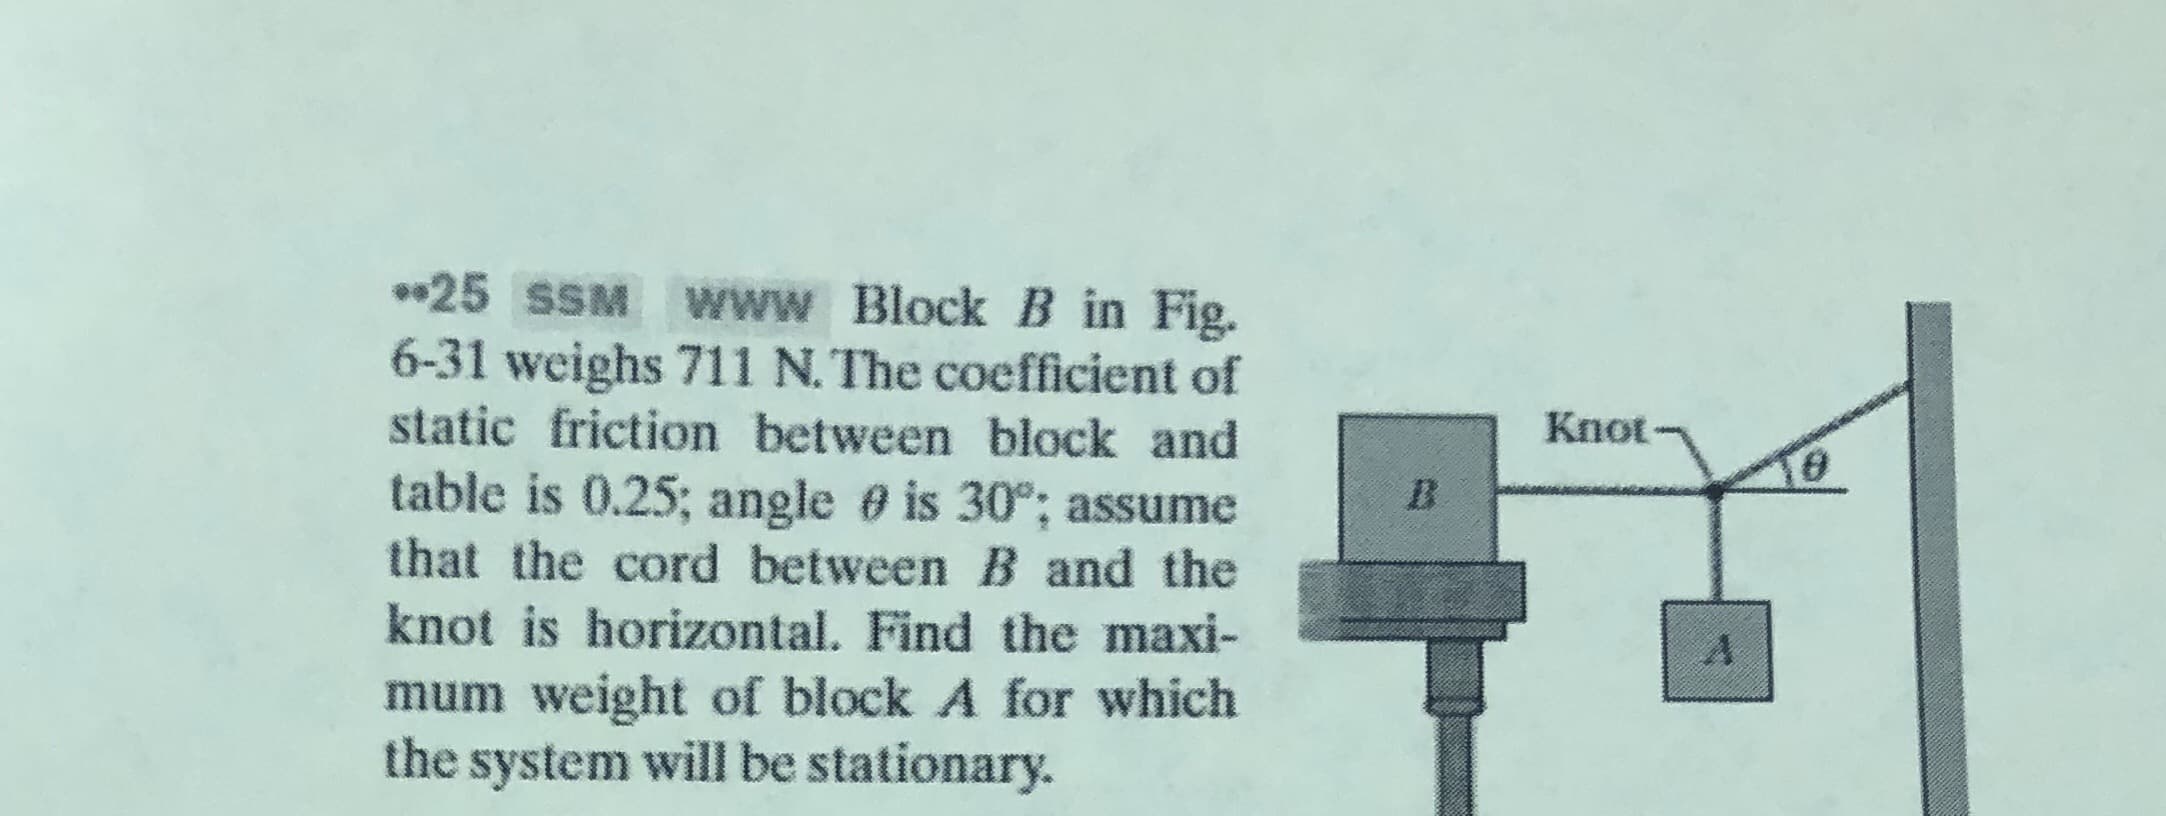 25 sSM www Block B in Fig.
6-31 weighs 711 N. The coefficient of
static friction between block and
Knot-
table is 0.25; angle is 30°; assume
that the cord between B and the
B.
knot is horizontal. Find the maxi-
mum weight of block A for which
the system will be stationary.
